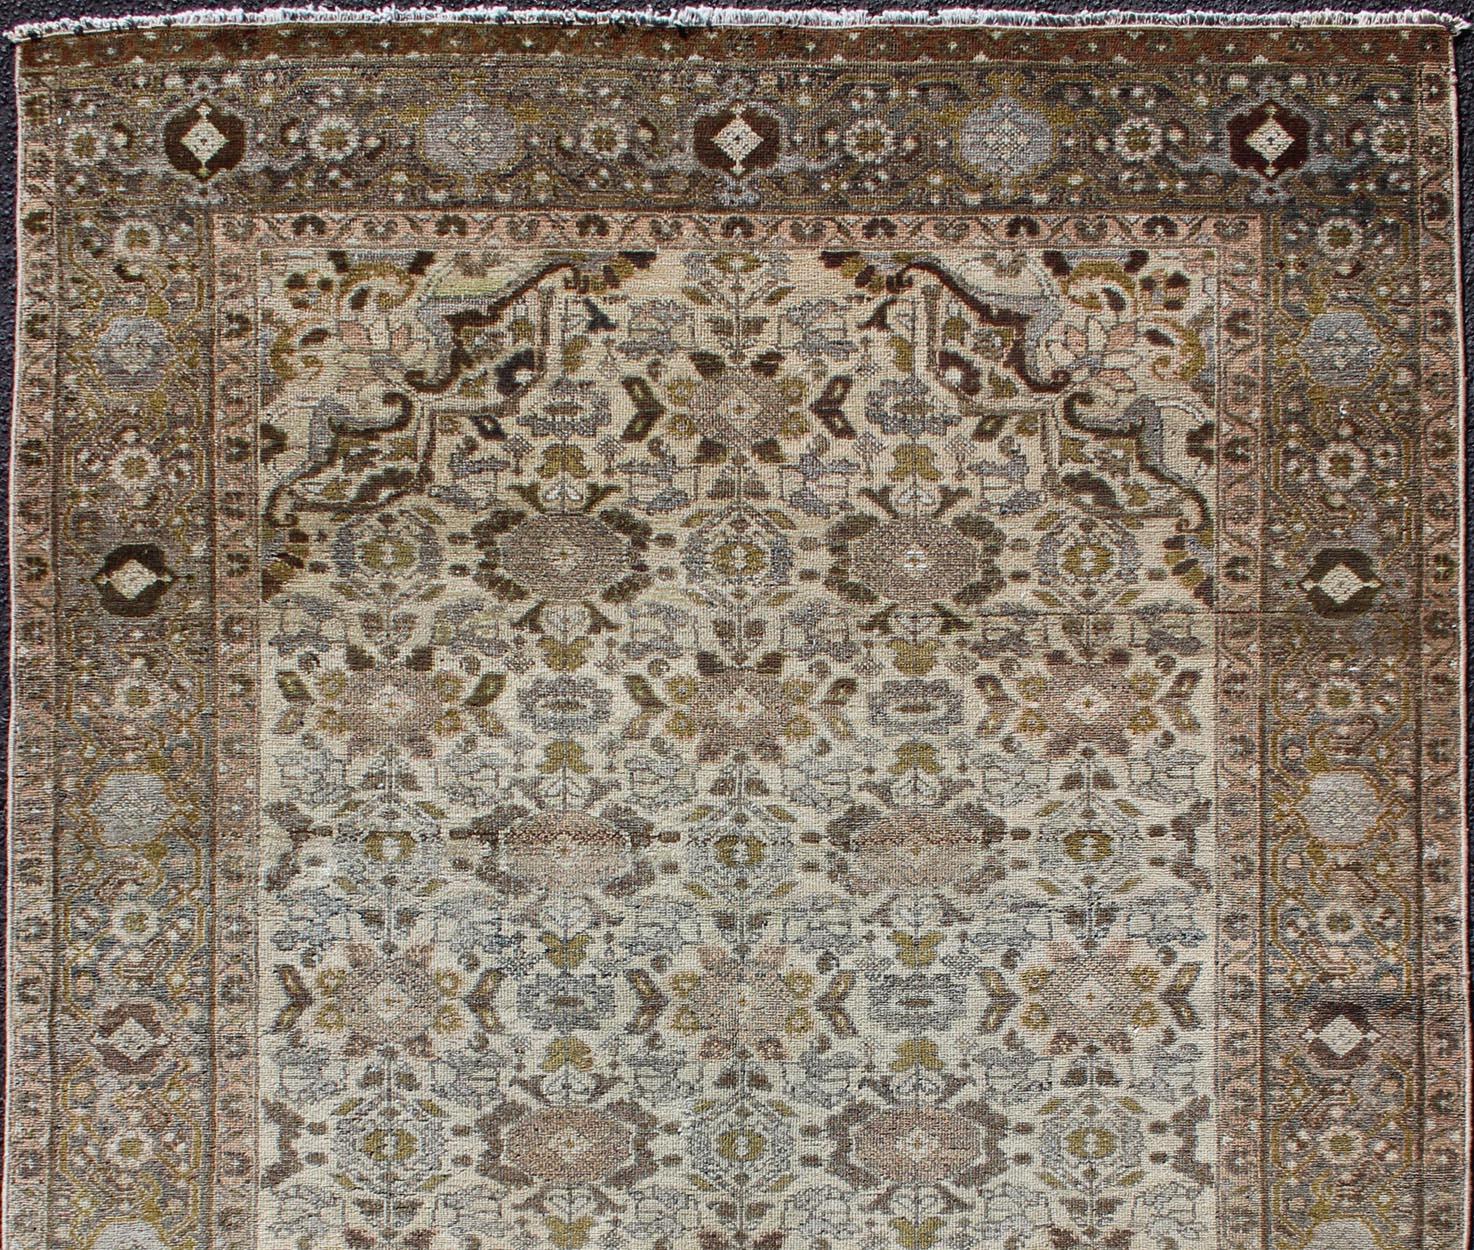 Hand-Knotted Antique Persian Malayer Rug with All-Over Boteh Design in Earth Tones